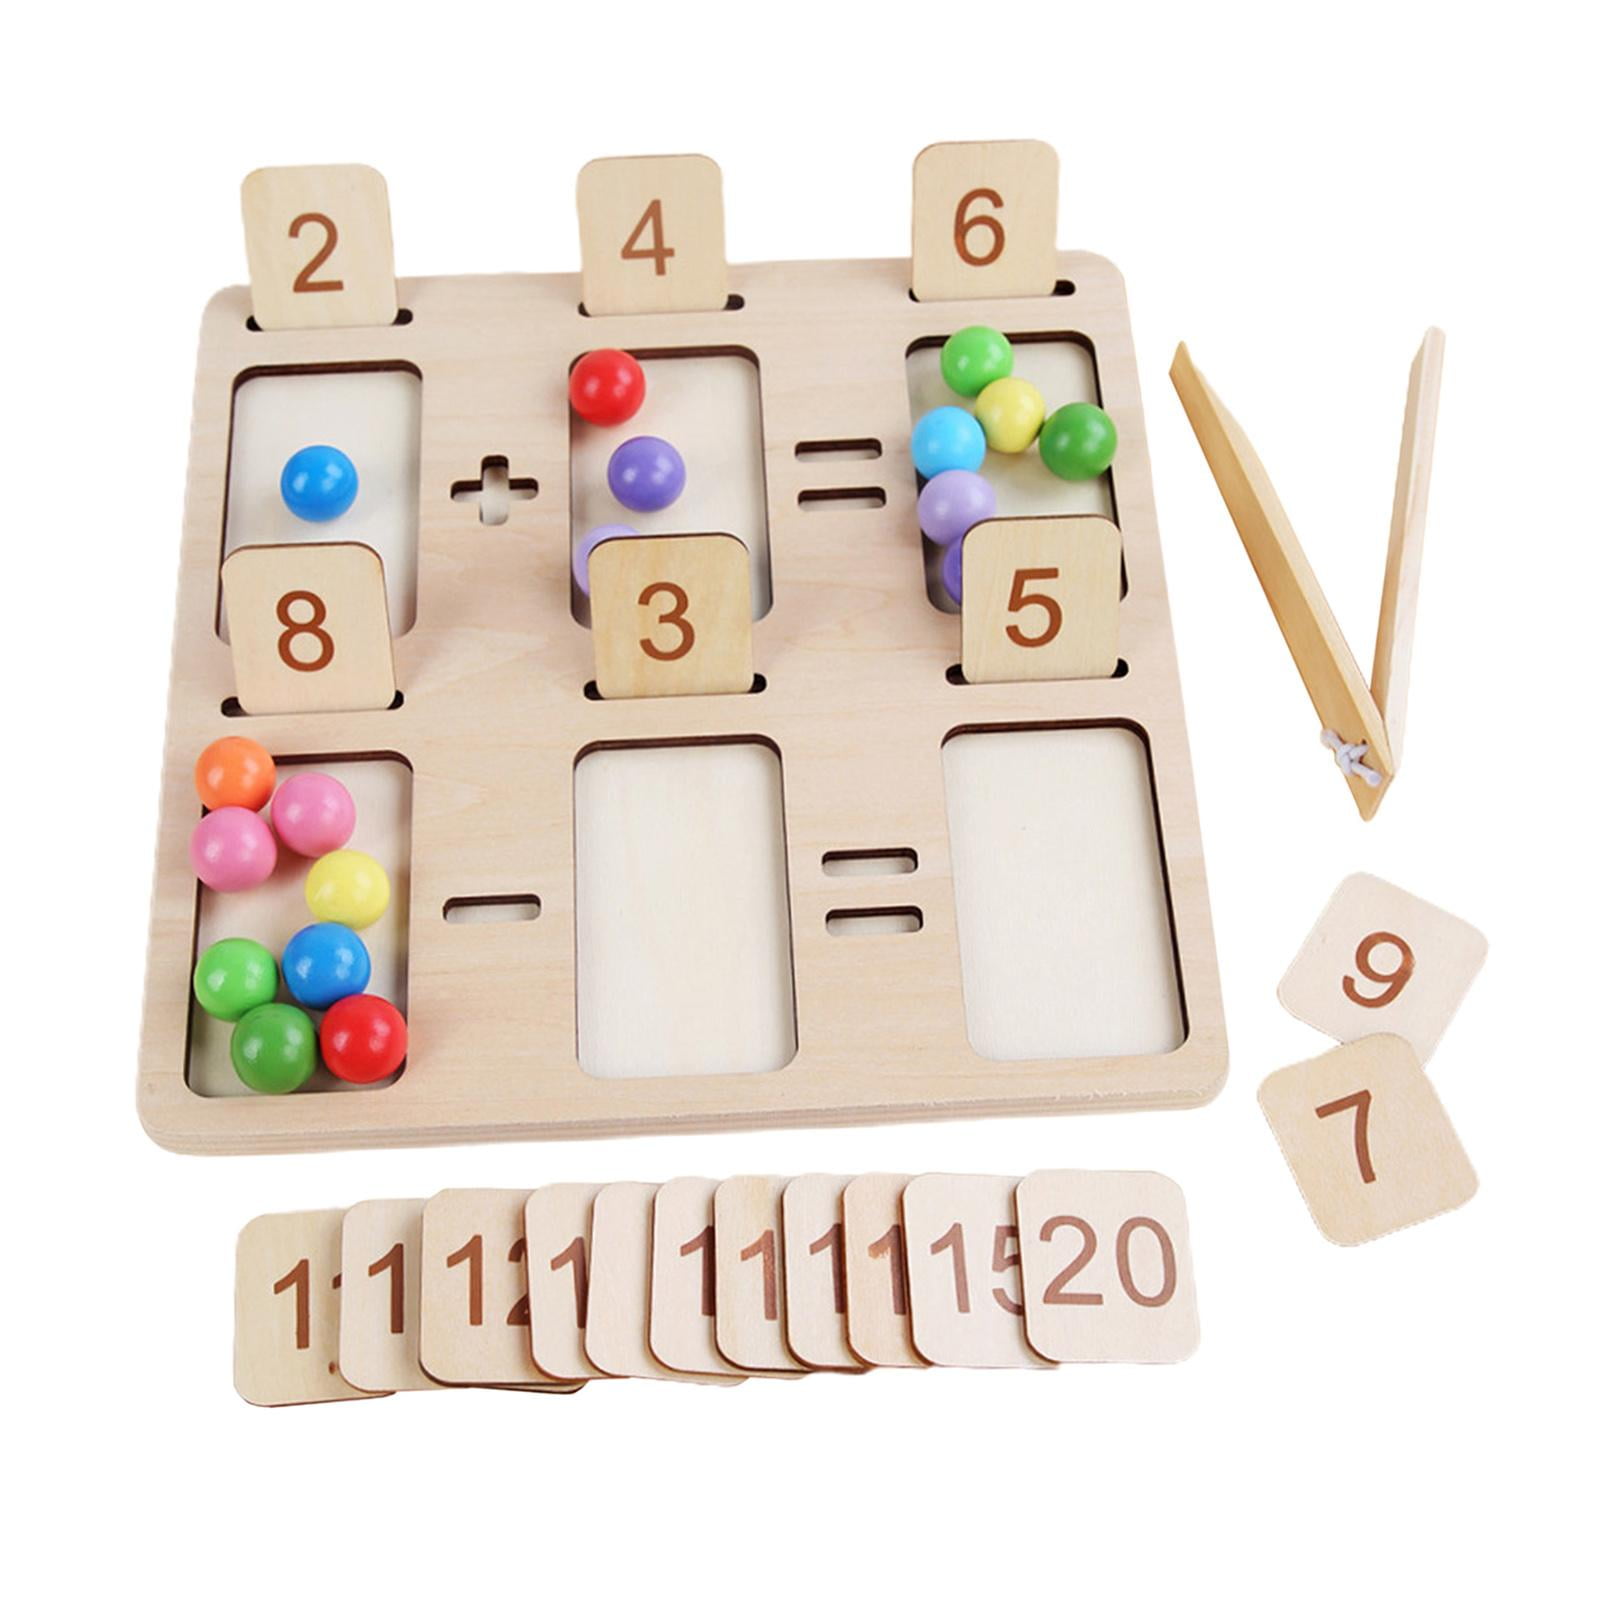 Details about   11Digits 17 Digits Children Plastic Calculating Beads Early Learning Puzzle Toys 